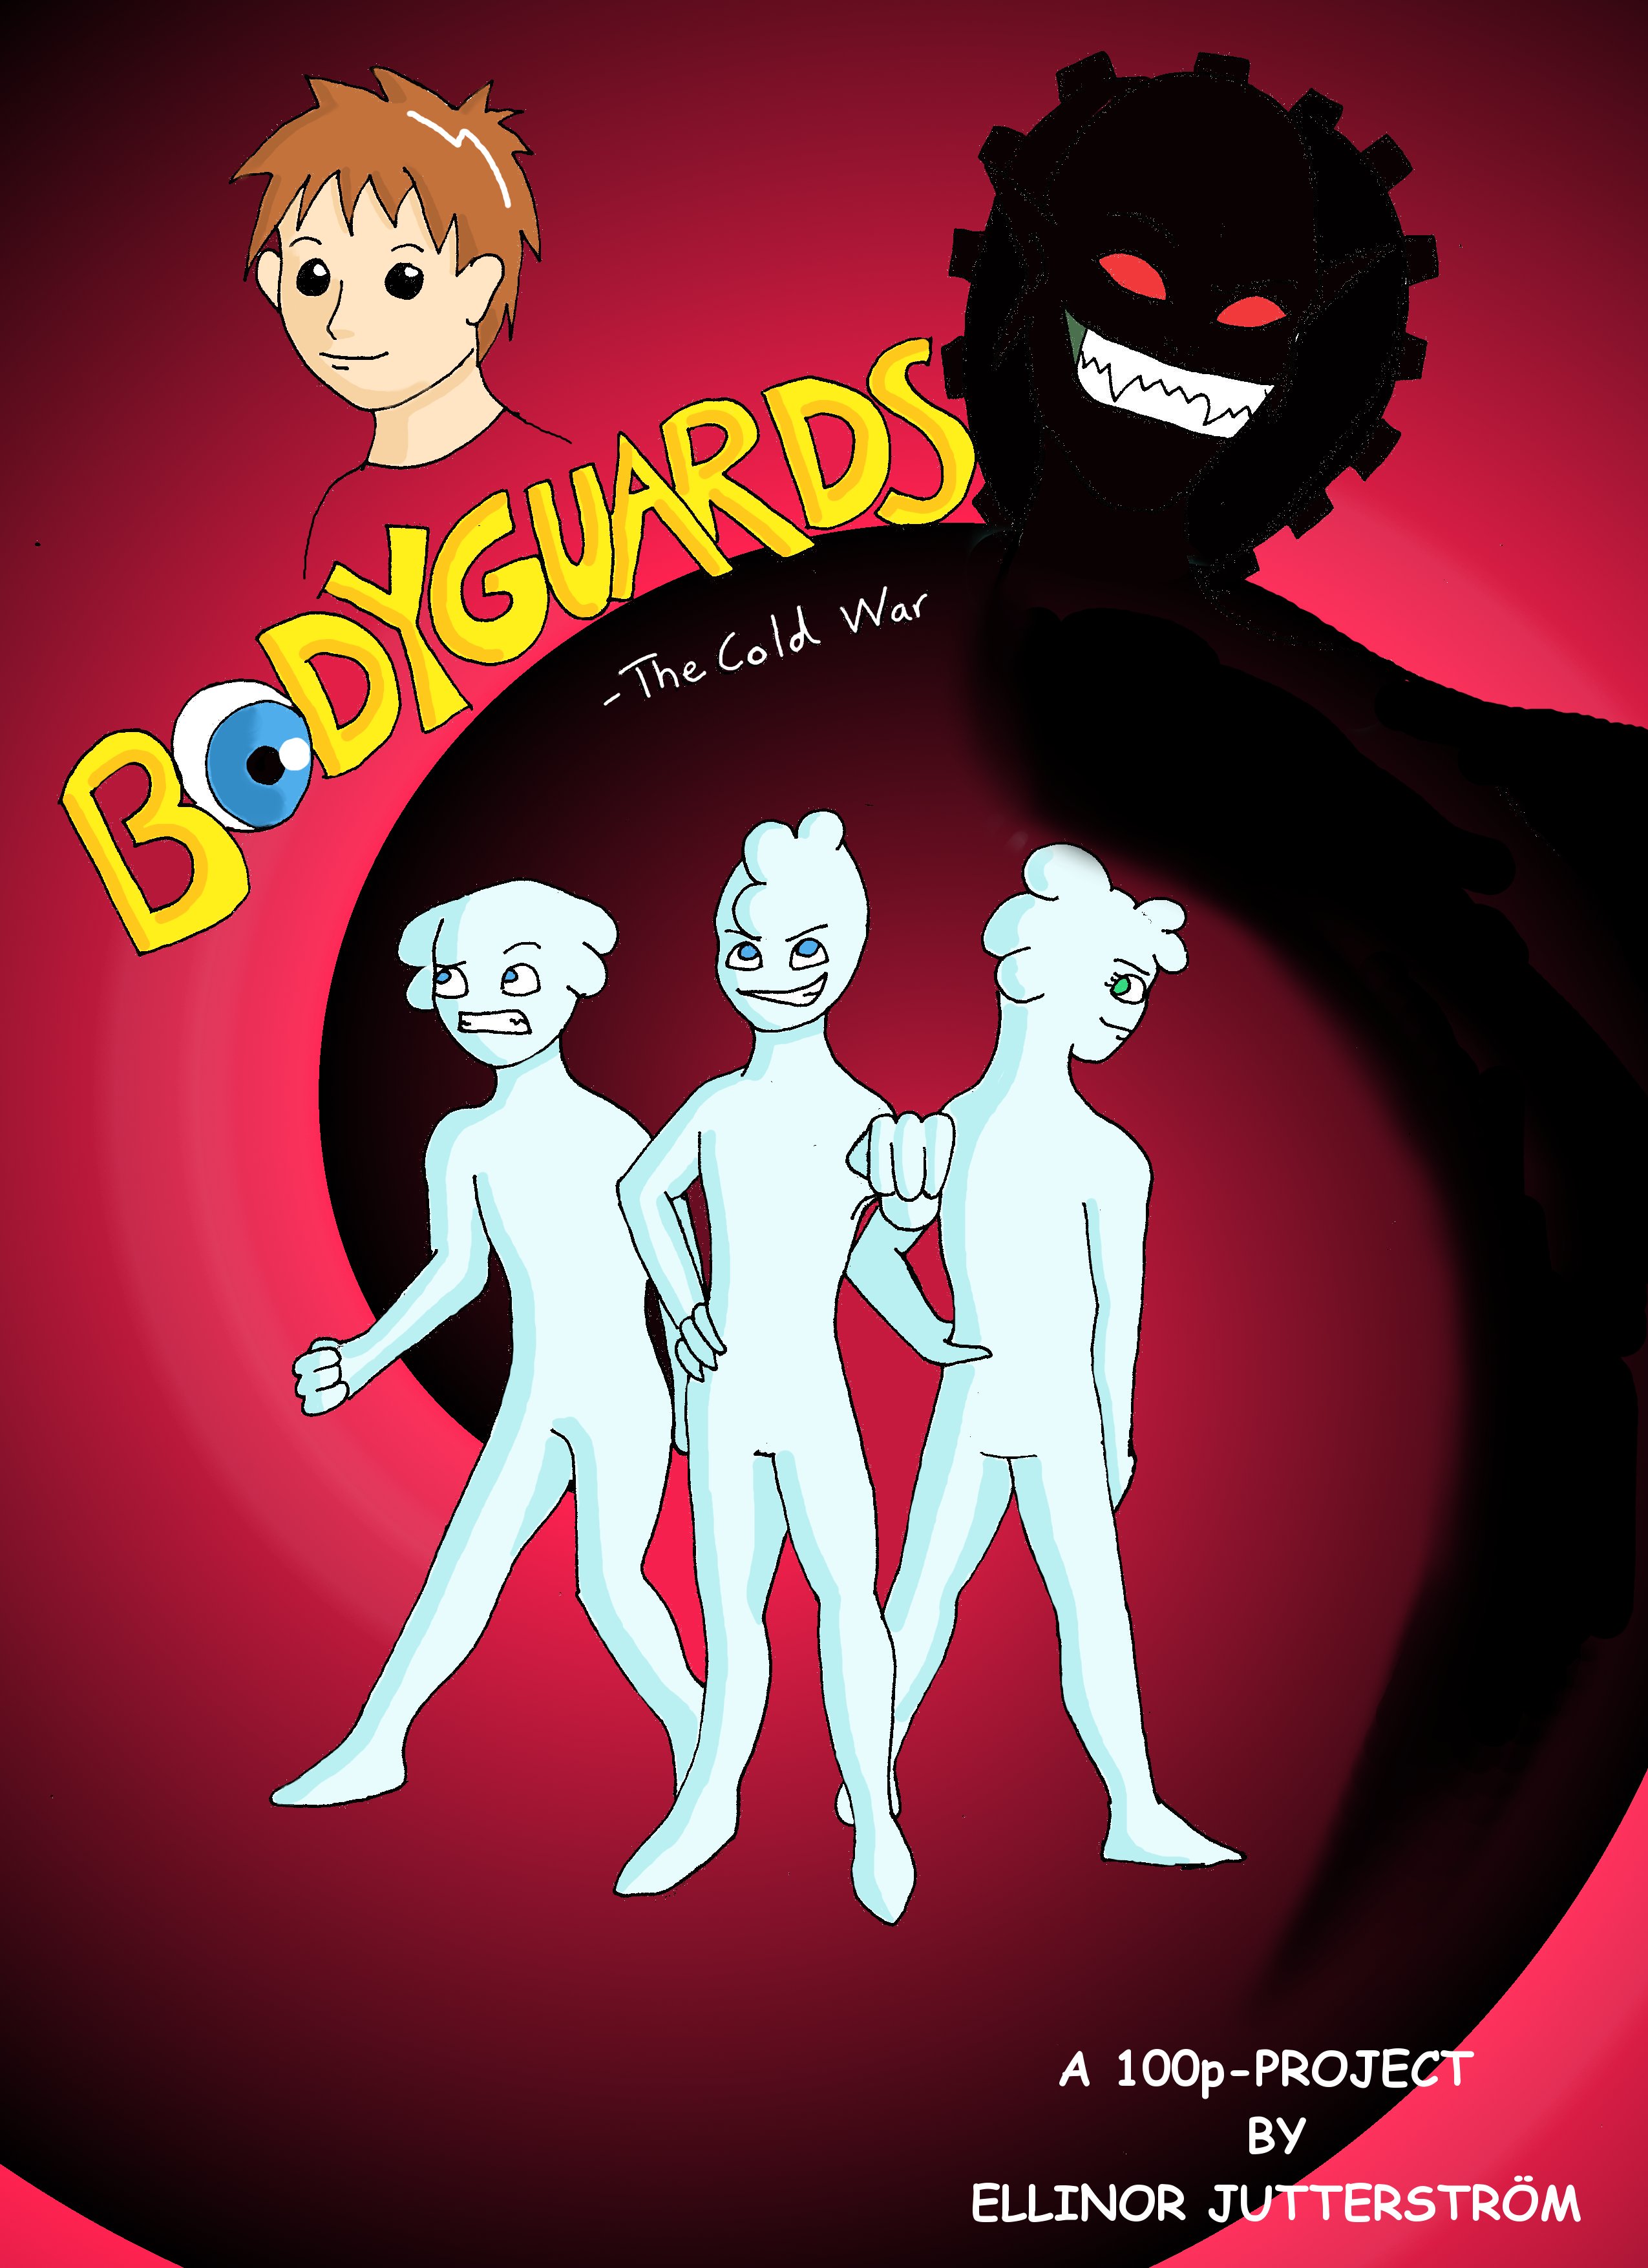 Bodyguards – The Cold War